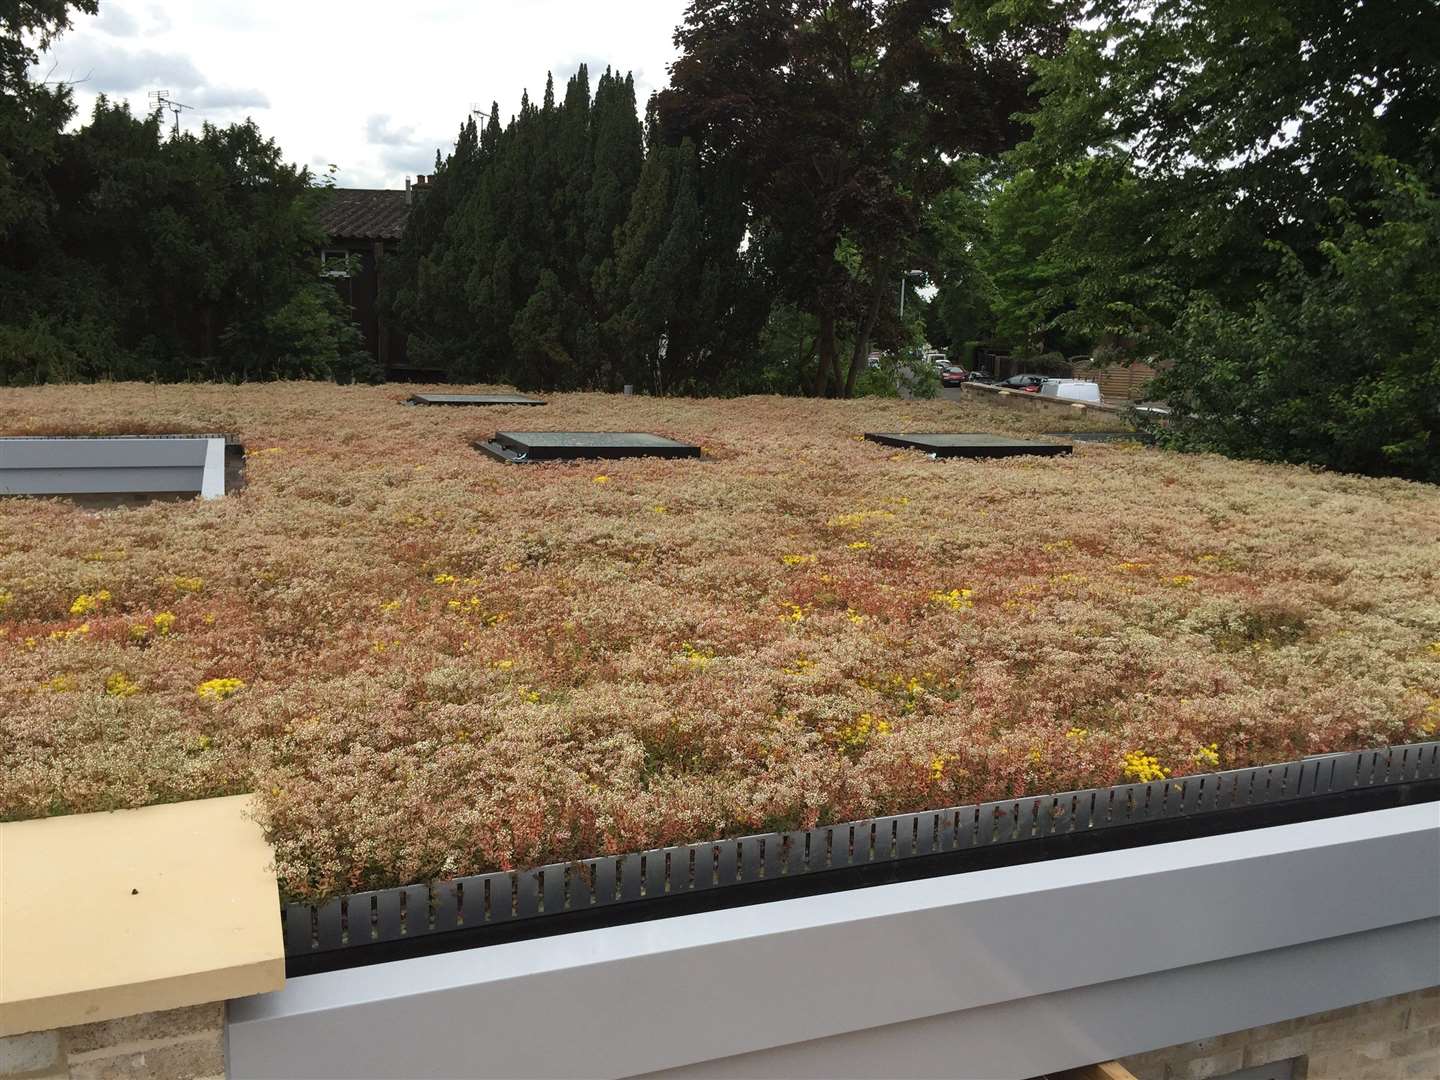 This is what the living roof could look like. Sourced by RCC.